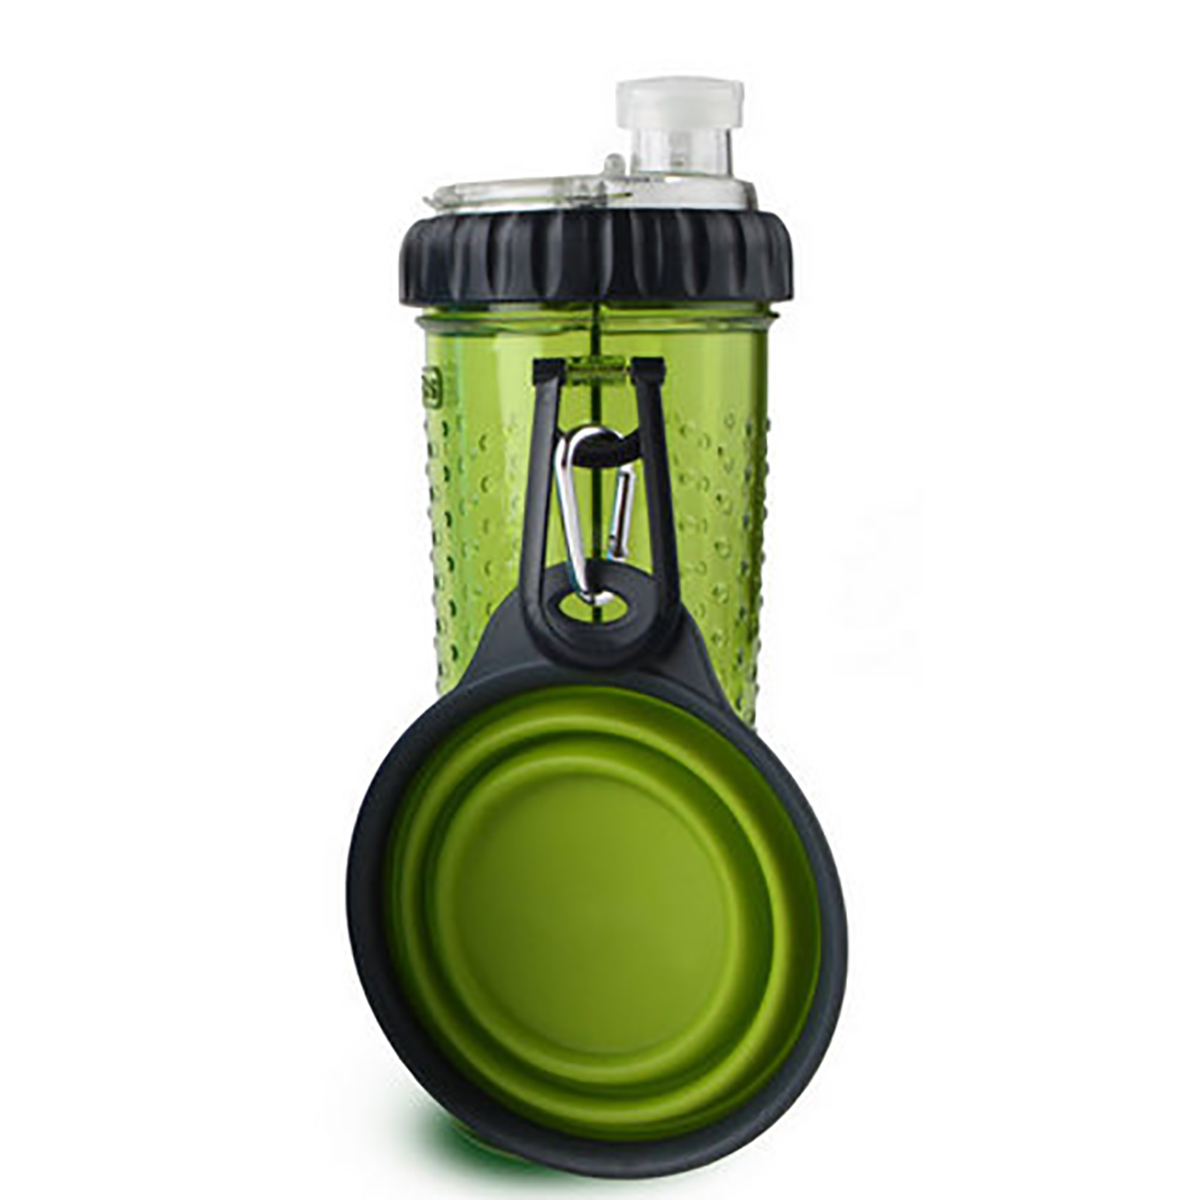 Snack-Duo with Companion Cup  - Green